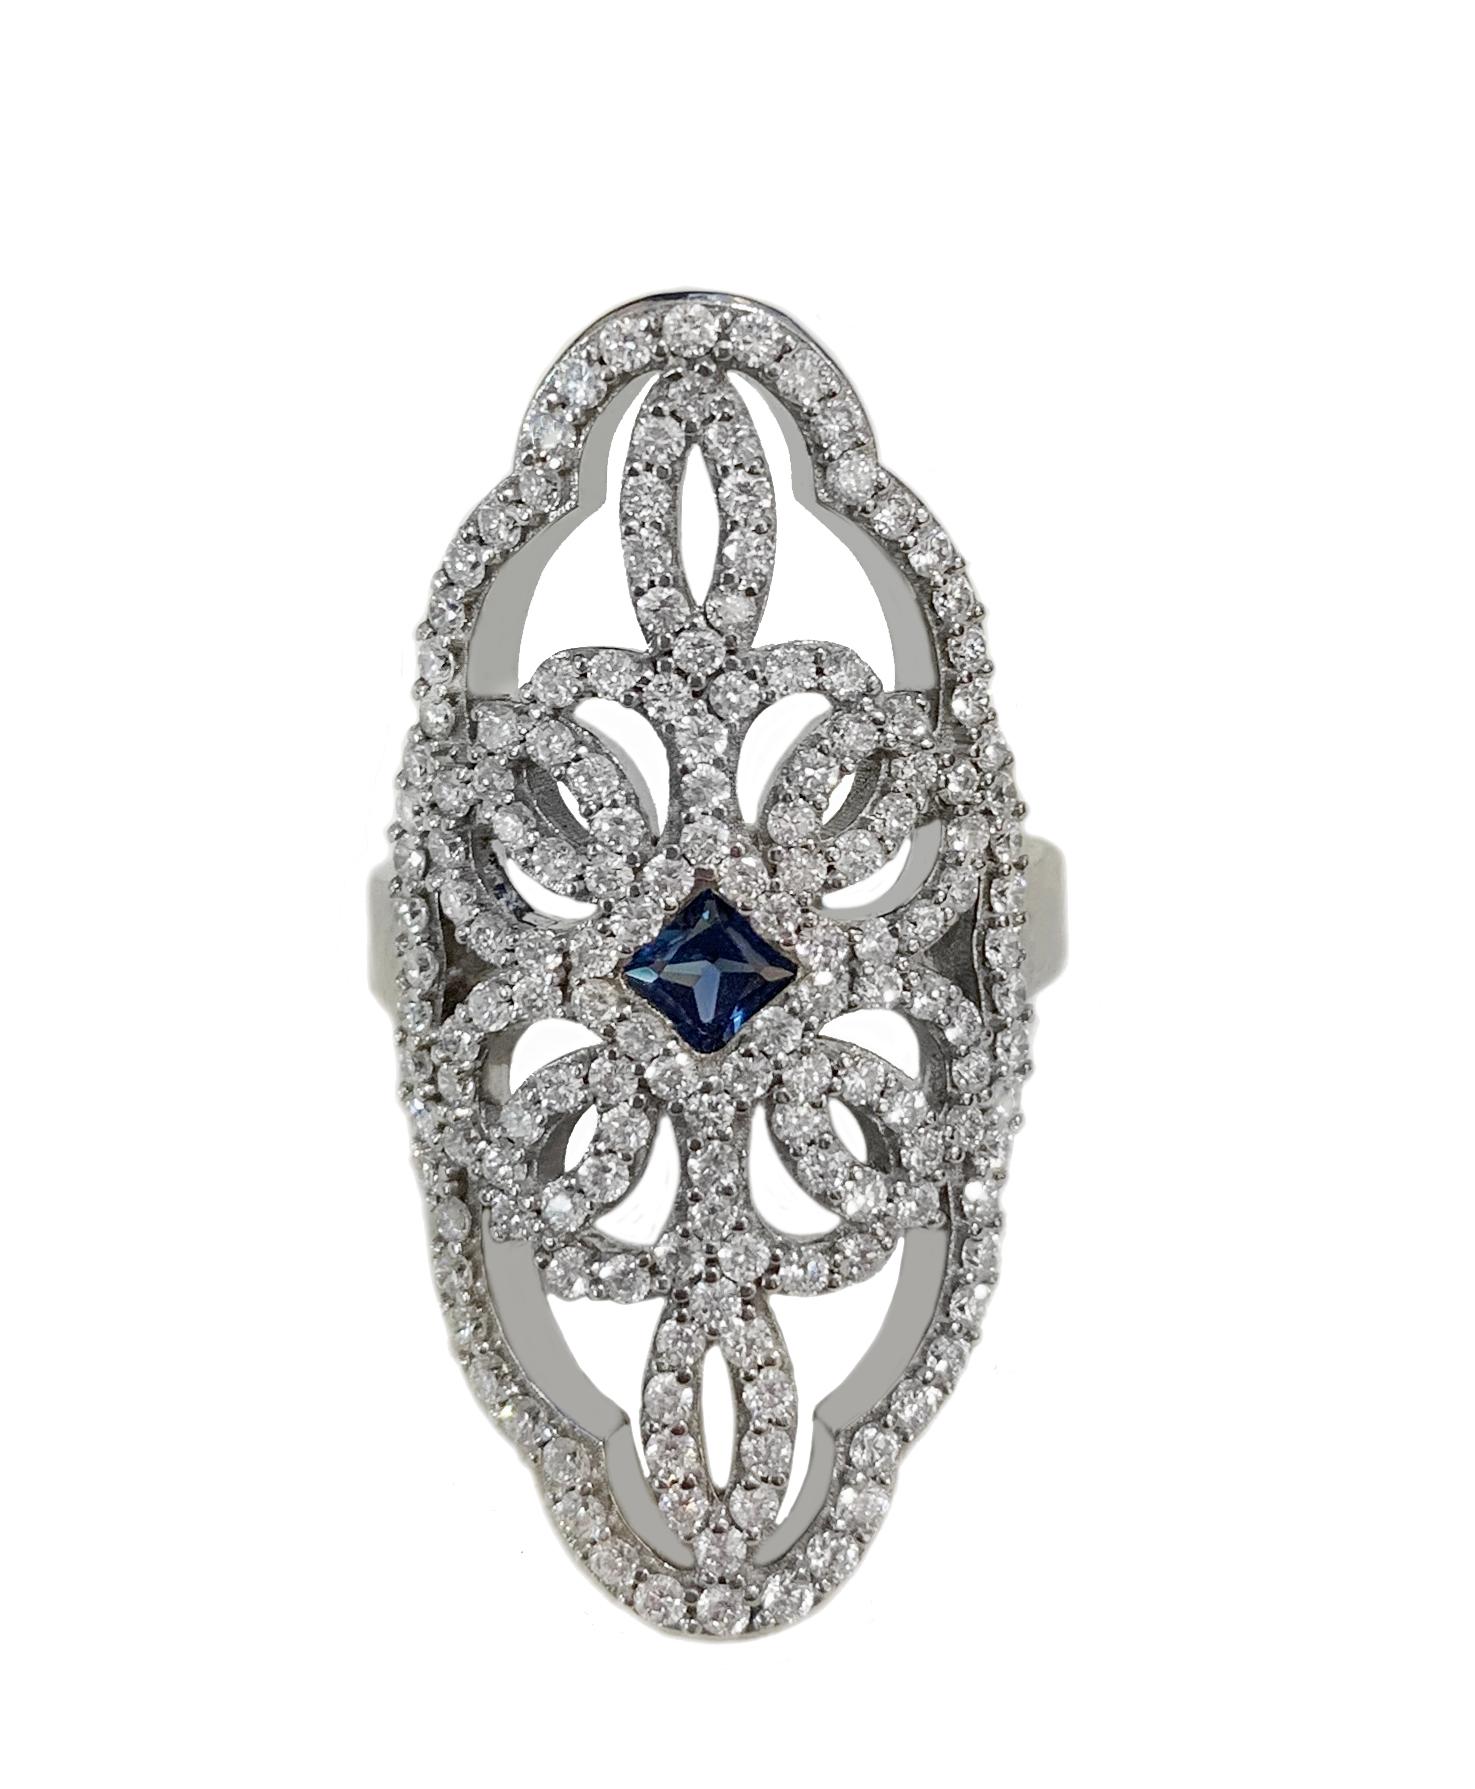 Material: 14k White Gold 
Weight:10.6gr 
Stones: Sapphire 0.30ct 
Diamonds:  2.5ct VS clarity G Color 
Ring size : 7
Ornament Dimension: 17x35mm